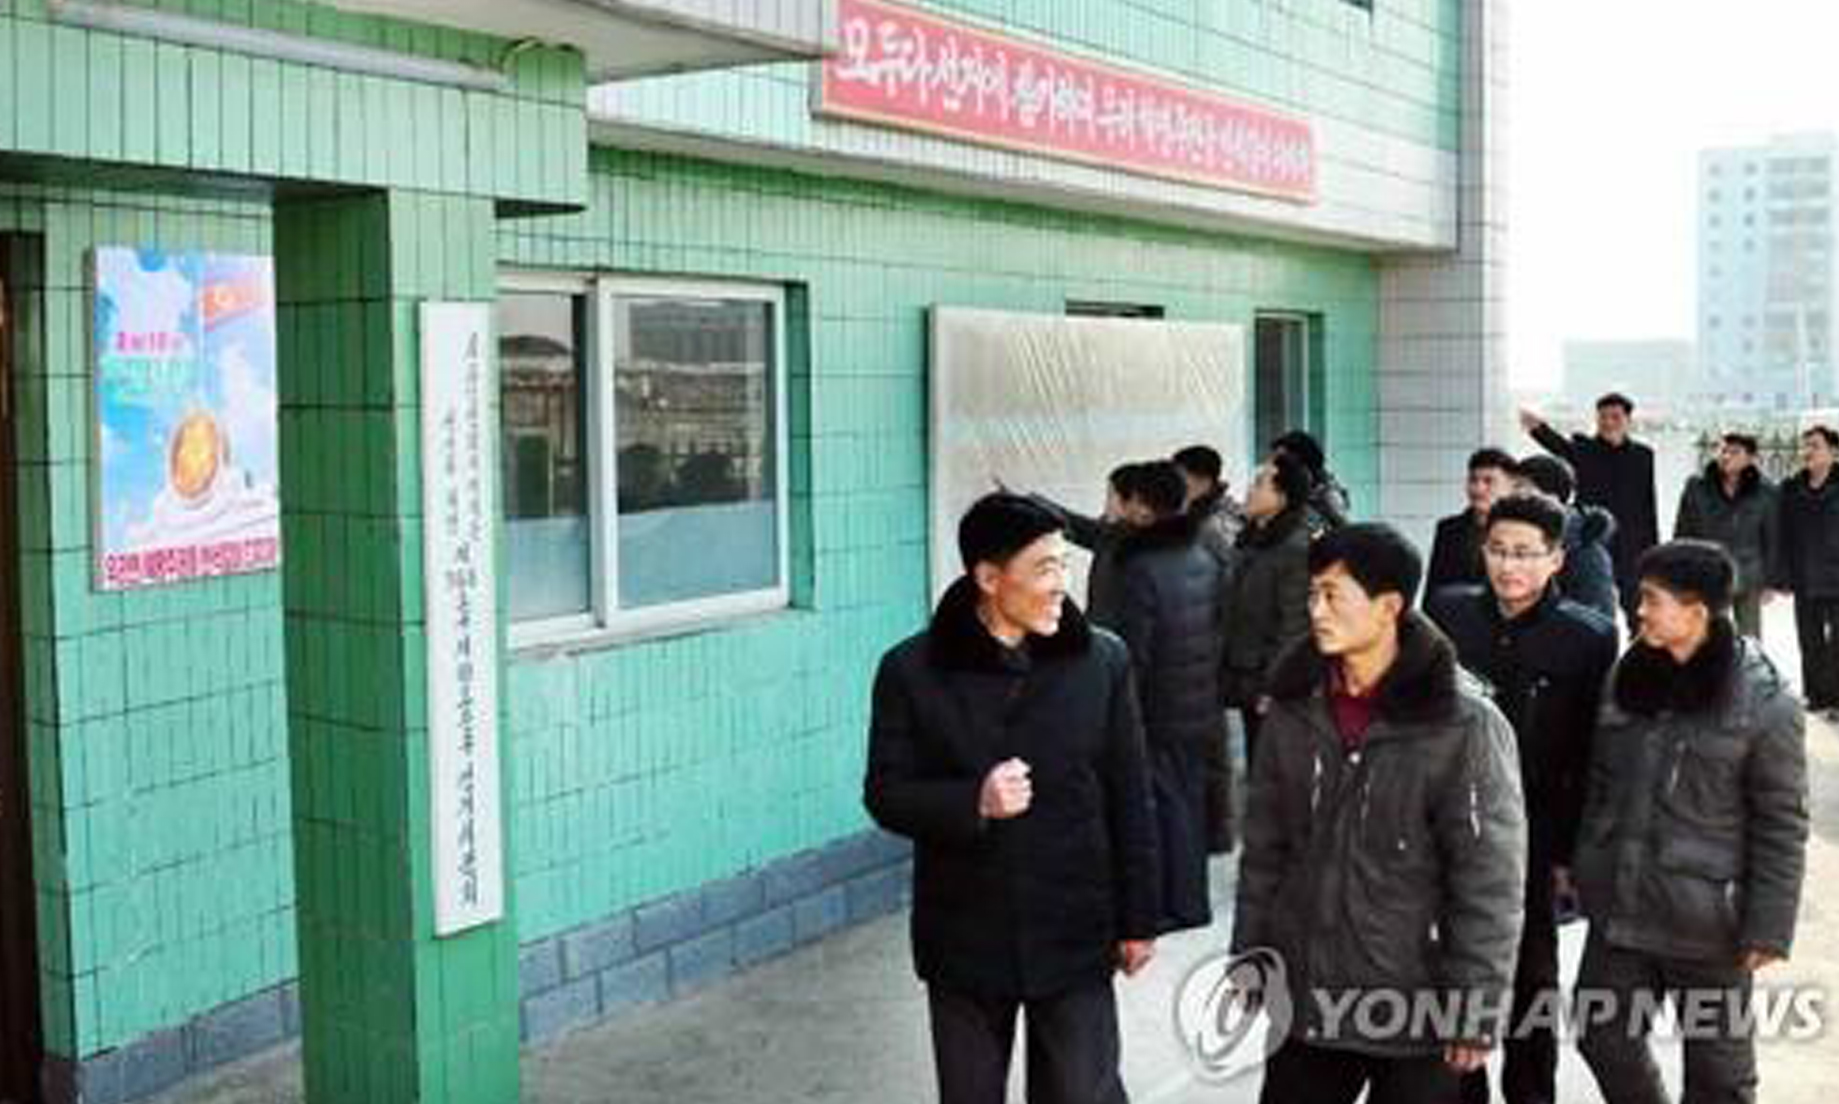 North Korea holds parliamentary elections